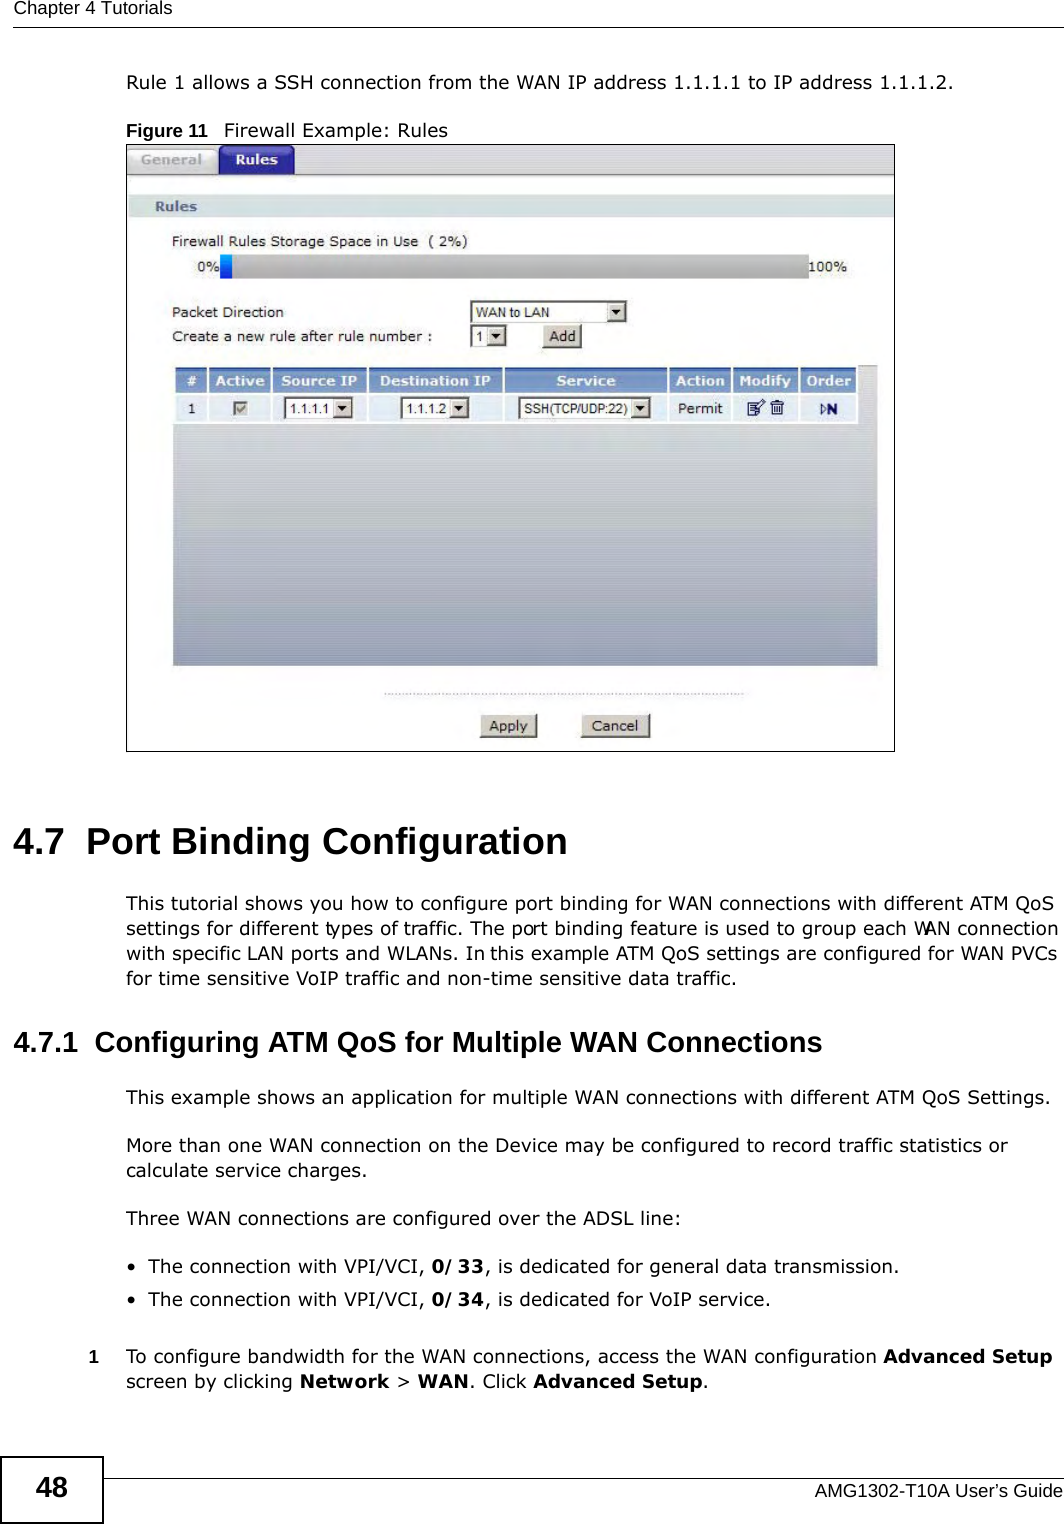 Chapter 4 TutorialsAMG1302-T10A User’s Guide48Rule 1 allows a SSH connection from the WAN IP address 1.1.1.1 to IP address 1.1.1.2.Figure 11   Firewall Example: Rules 4.7  Port BindingConfigurationThis tutorial shows you how to configure port binding for WAN connections with different ATM QoS settings for different types of traffic. The port binding feature is used to group each WAN connection with specific LAN ports and WLANs. In this example ATM QoS settings are configured for WAN PVCs for time sensitive VoIP traffic and non-time sensitive data traffic. 4.7.1  Configuring ATM QoS for Multiple WAN ConnectionsThis example shows an application for multiple WAN connections with different ATM QoS Settings.More than one WAN connection on the Device may be configured to record traffic statistics or calculate service charges.Three WAN connections are configured over the ADSL line:• The connection with VPI/VCI, 0/33, is dedicated for general data transmission.• The connection with VPI/VCI, 0/34, is dedicated for VoIP service.1To configure bandwidth for the WAN connections, access the WAN configuration Advanced Setup screen by clicking Network &gt; WAN. Click Advanced Setup.